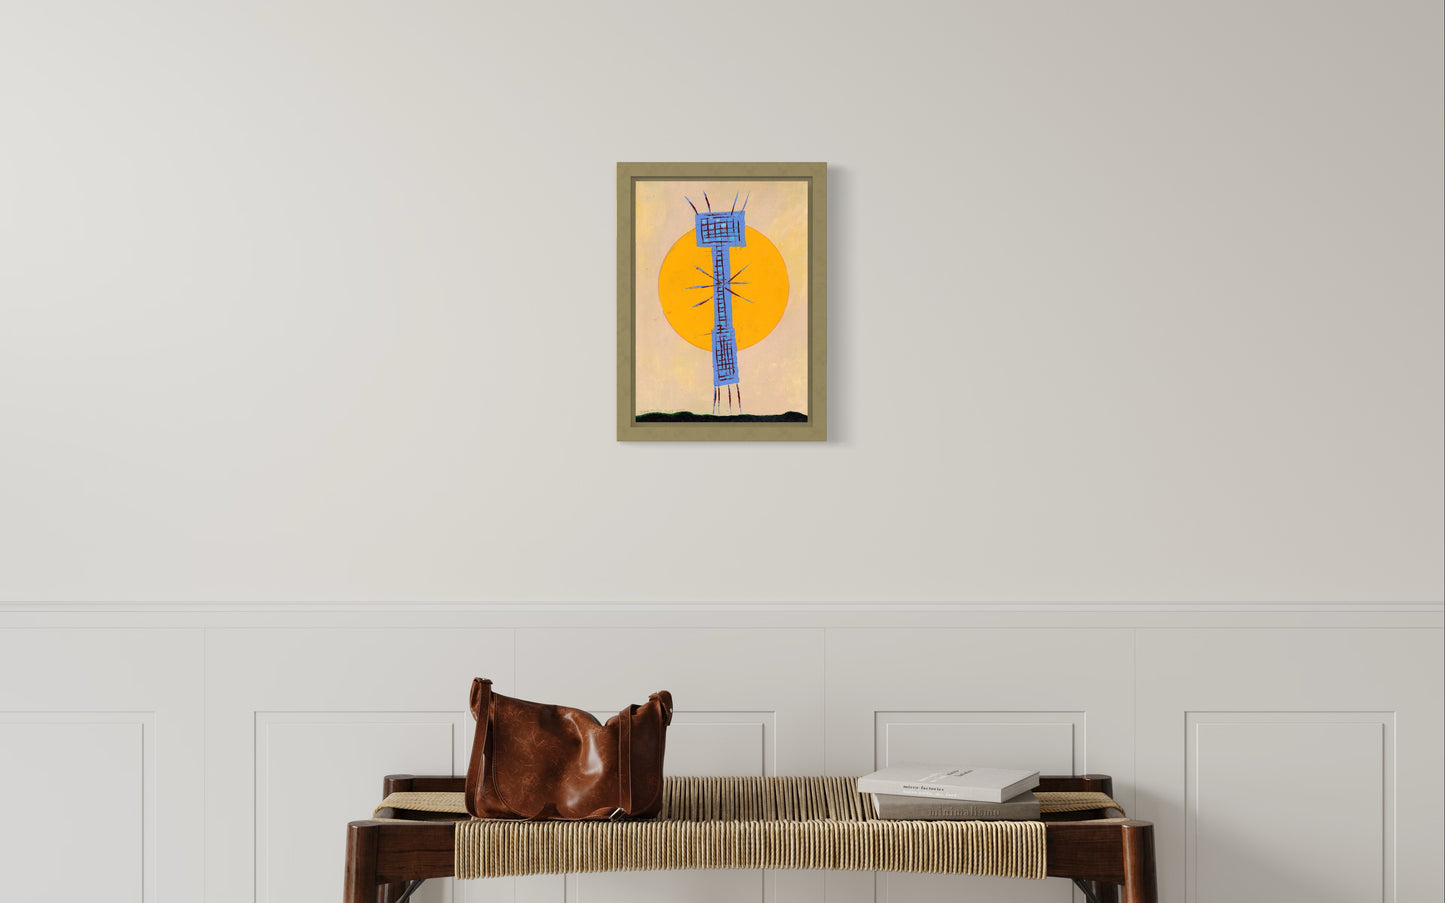 Waiting for Godot. Acrylic on Cardboard. Framed. 10" x 14". 2000. Original Painting. Klee. Abstract. Surrealism.